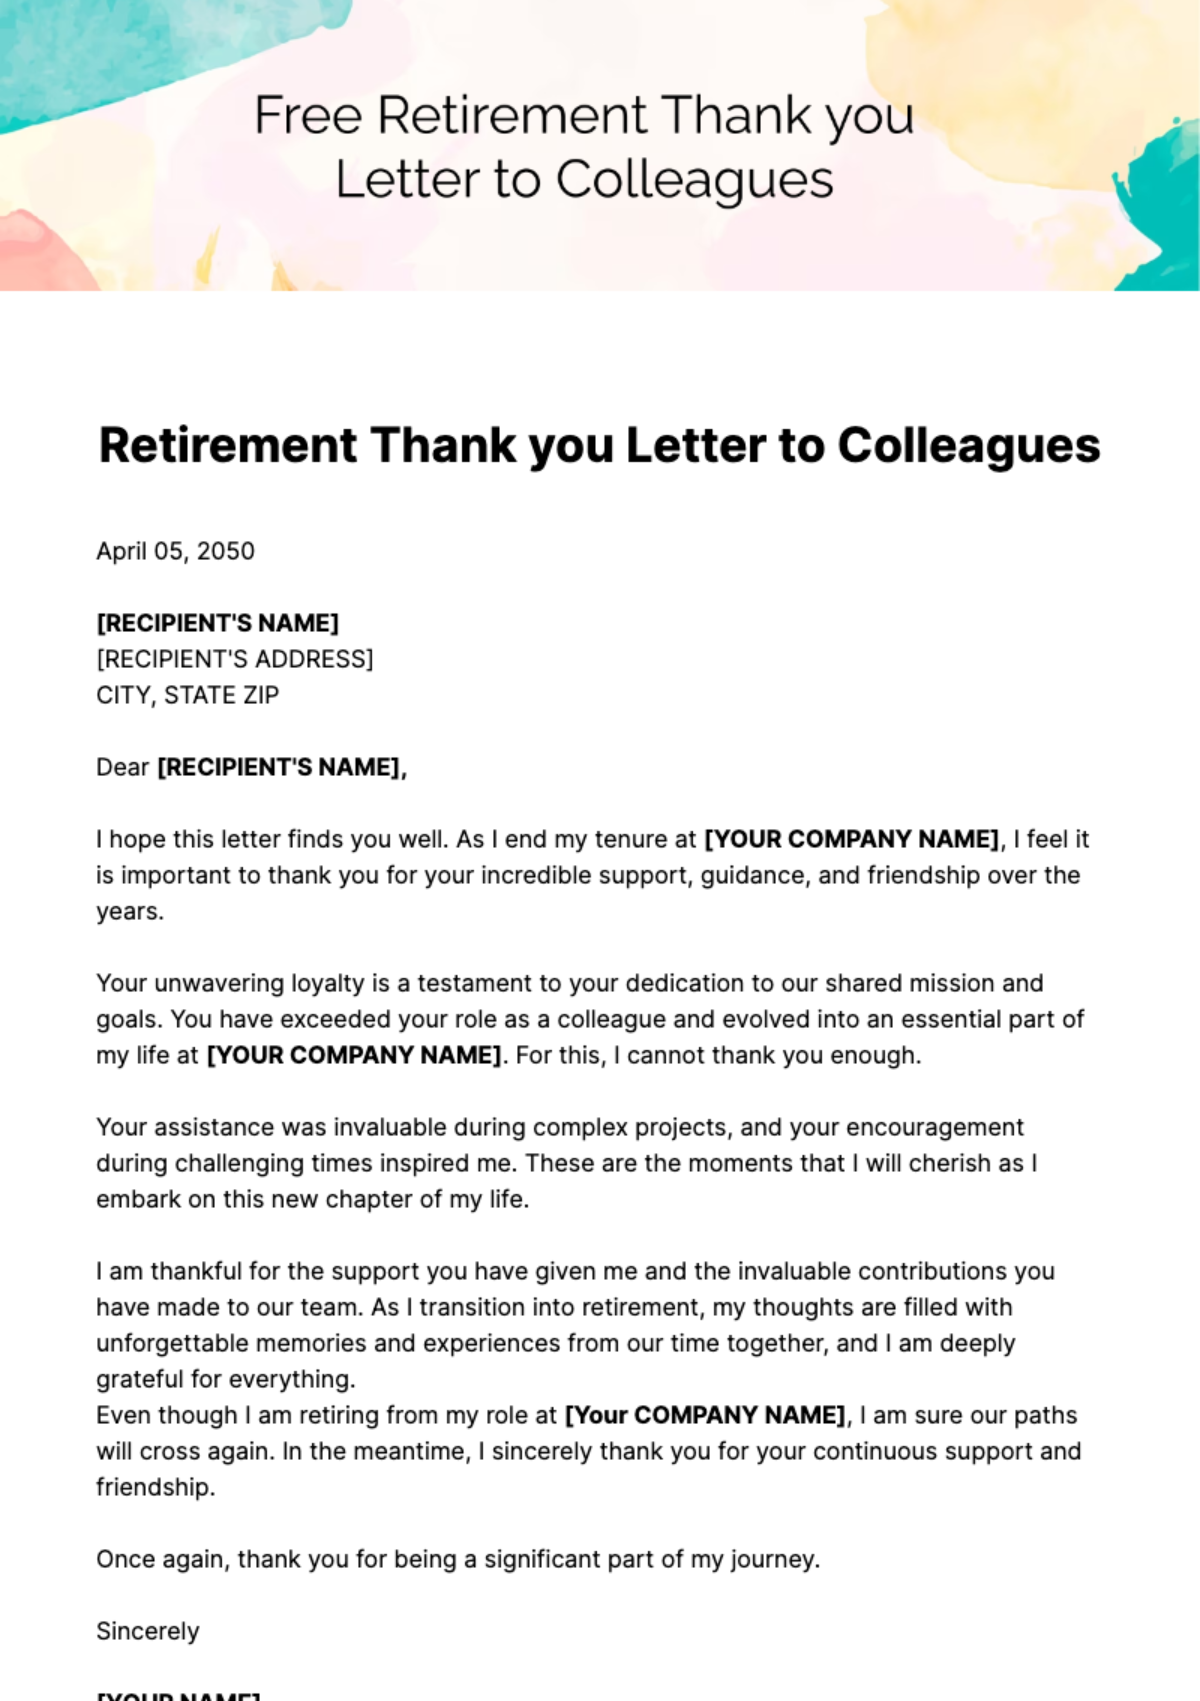 Free Retirement Thank you Letter to Colleagues Template